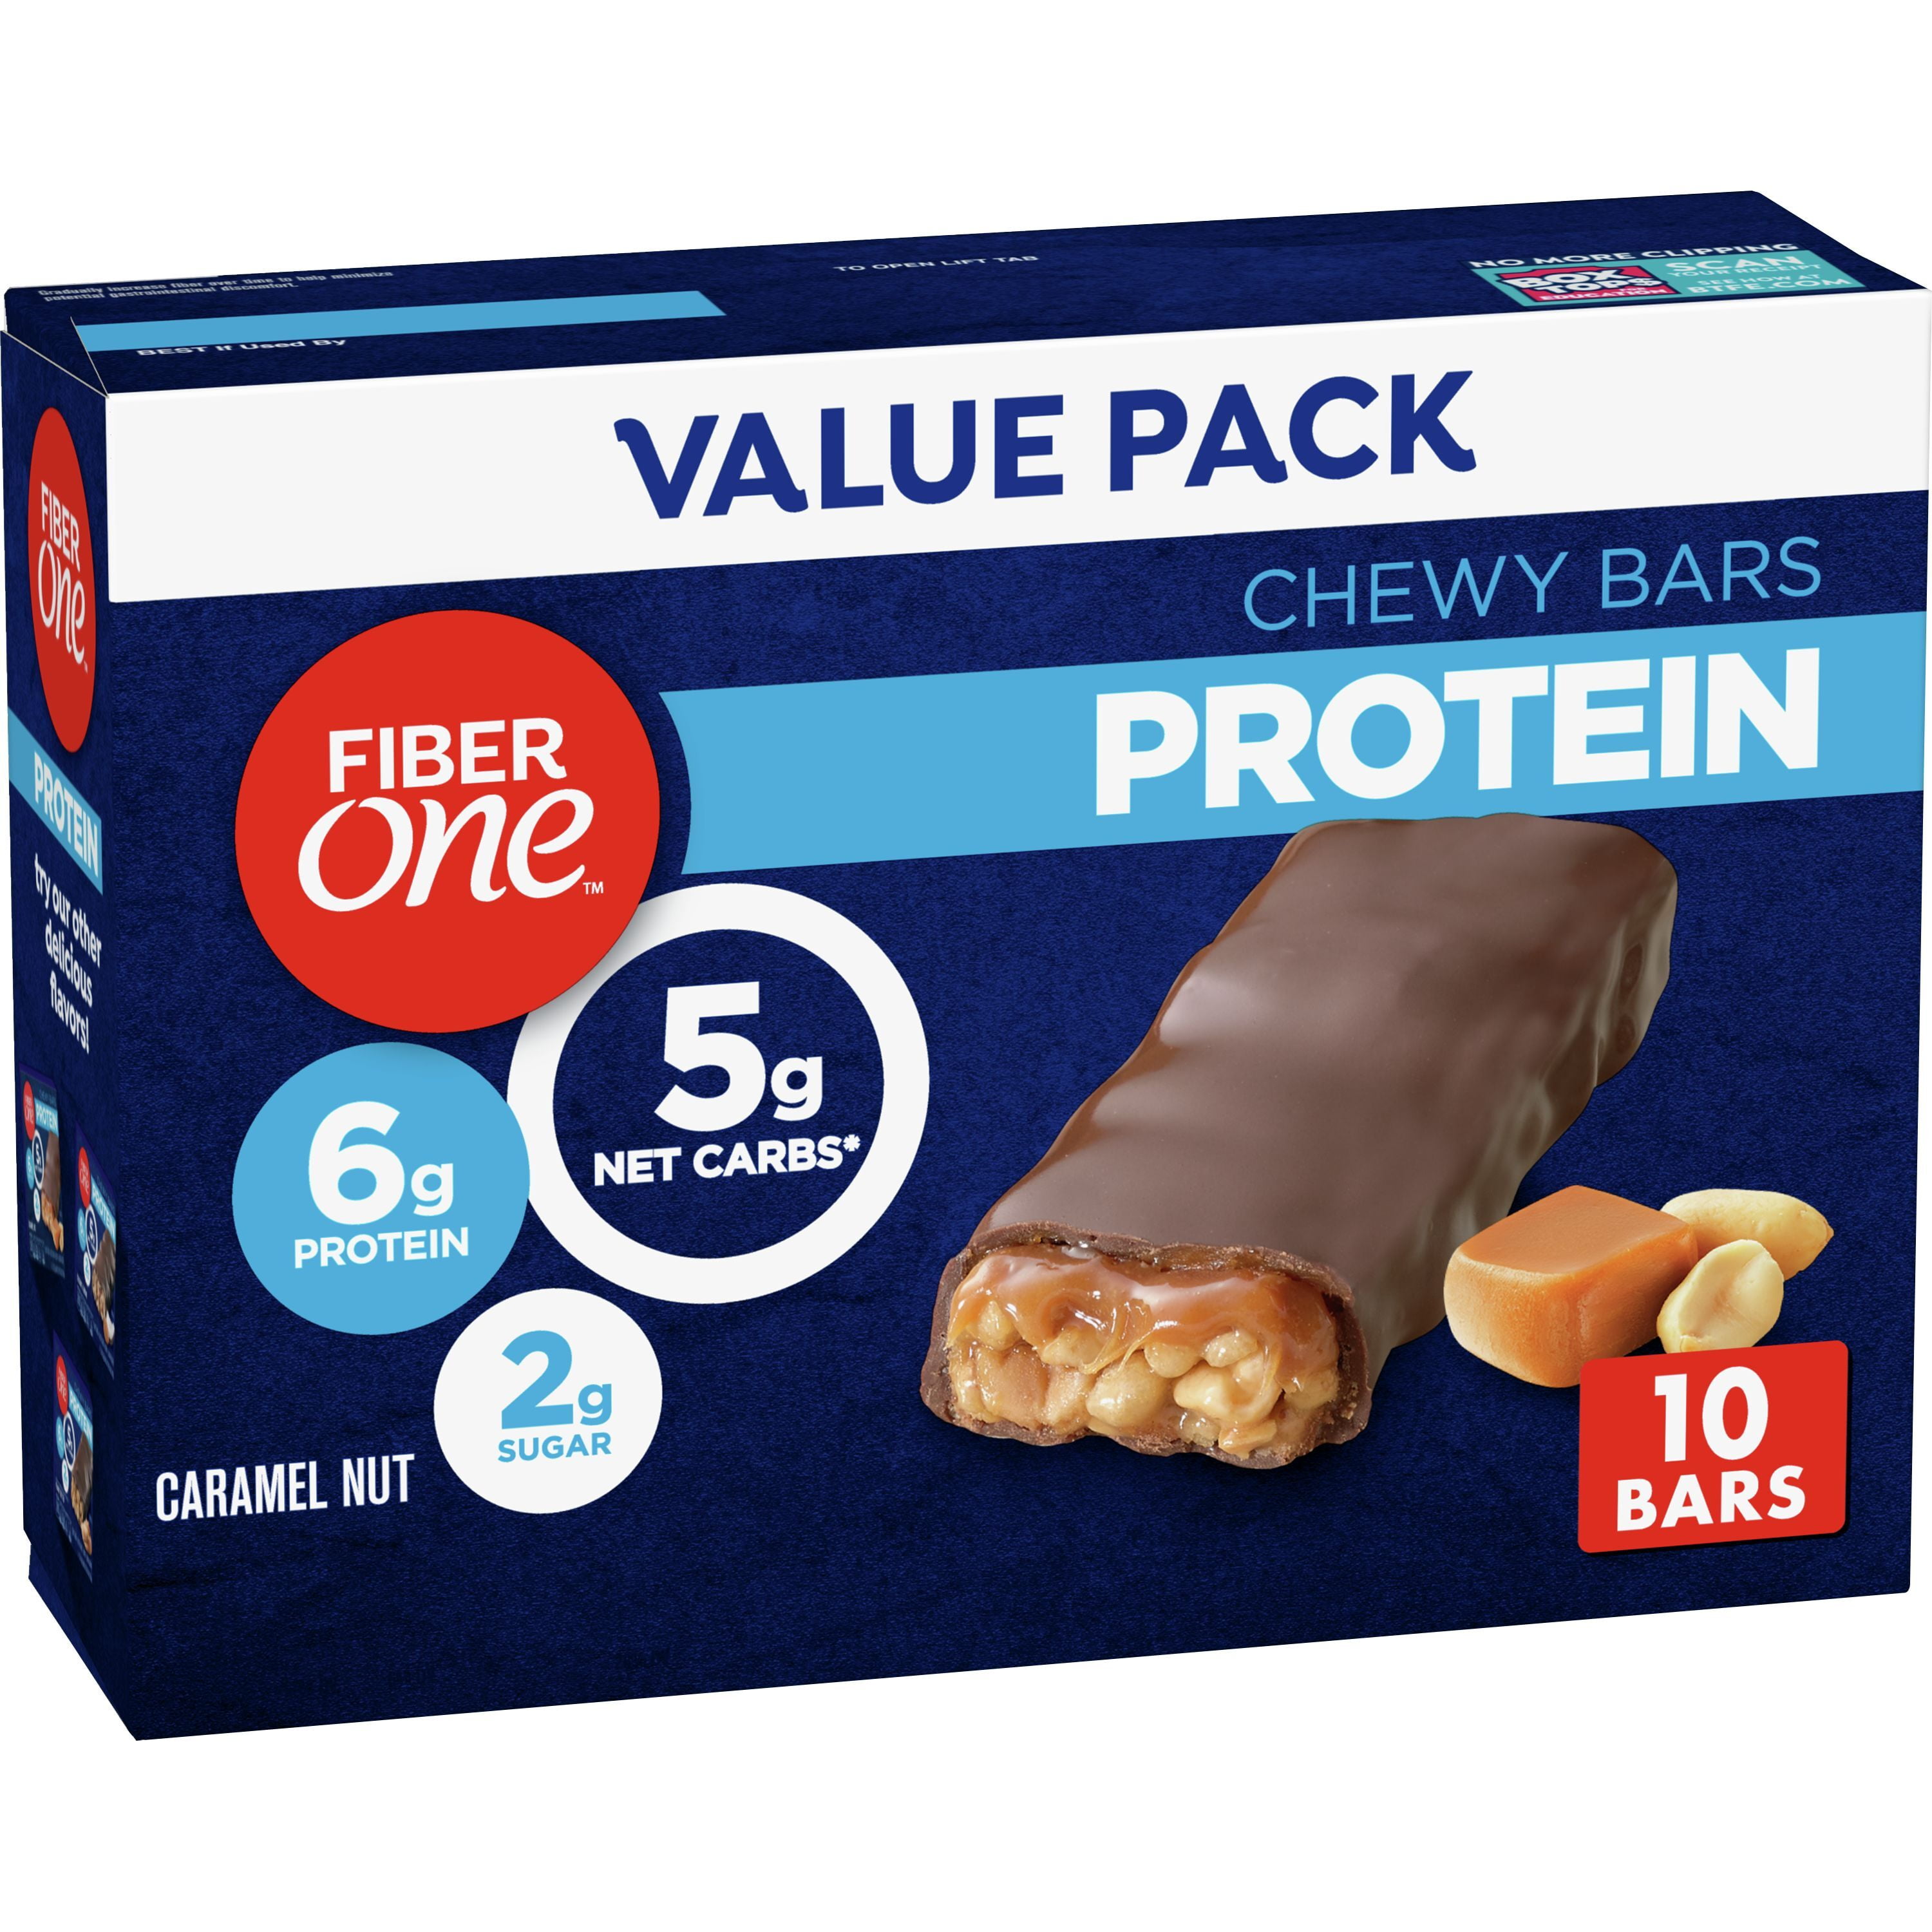 Fiber One Chewy Nut, Pack of Value 10 Caramel Protein 6 ct Bars, Pack,